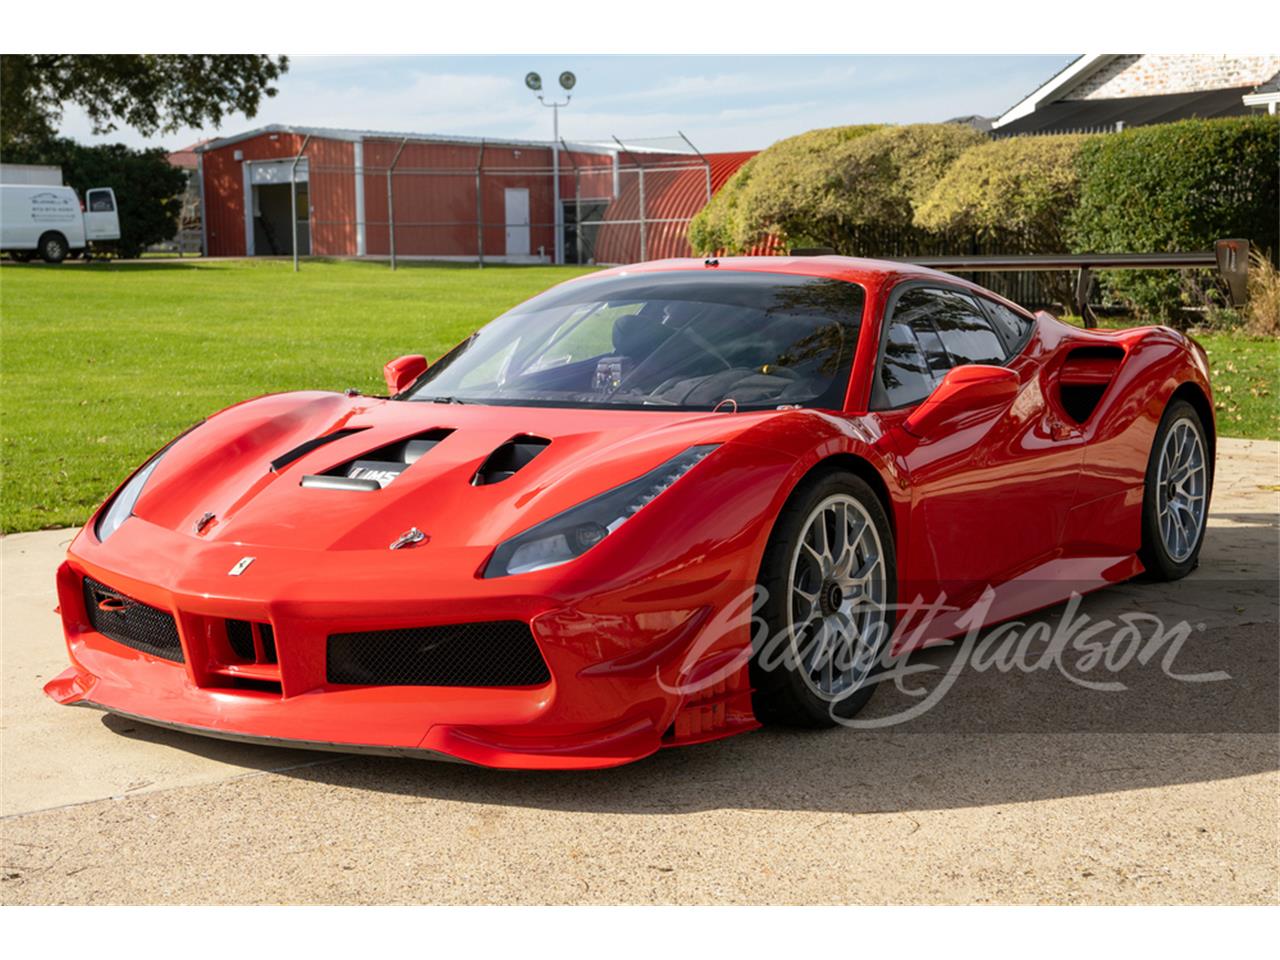 For Sale at Auction: 2018 Ferrari 488 in Scottsdale, Arizona for sale in Scottsdale, AZ